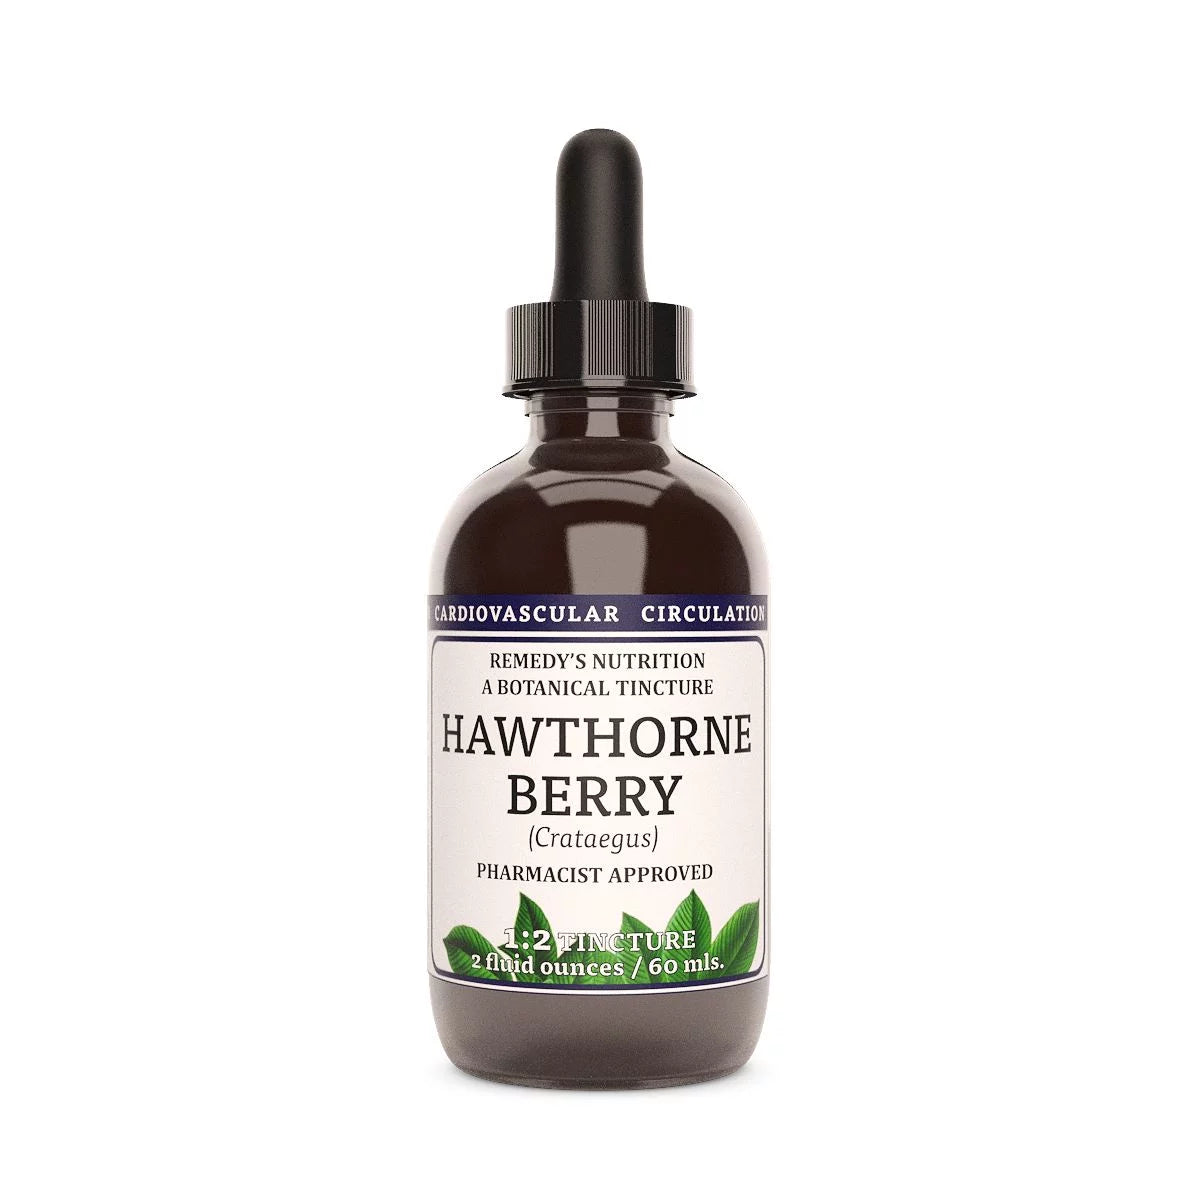 Image of Remedy's Nutrition® Hawthorn Berry Tincture Dietary Herbal Supplement front bottle. Made in the USA.